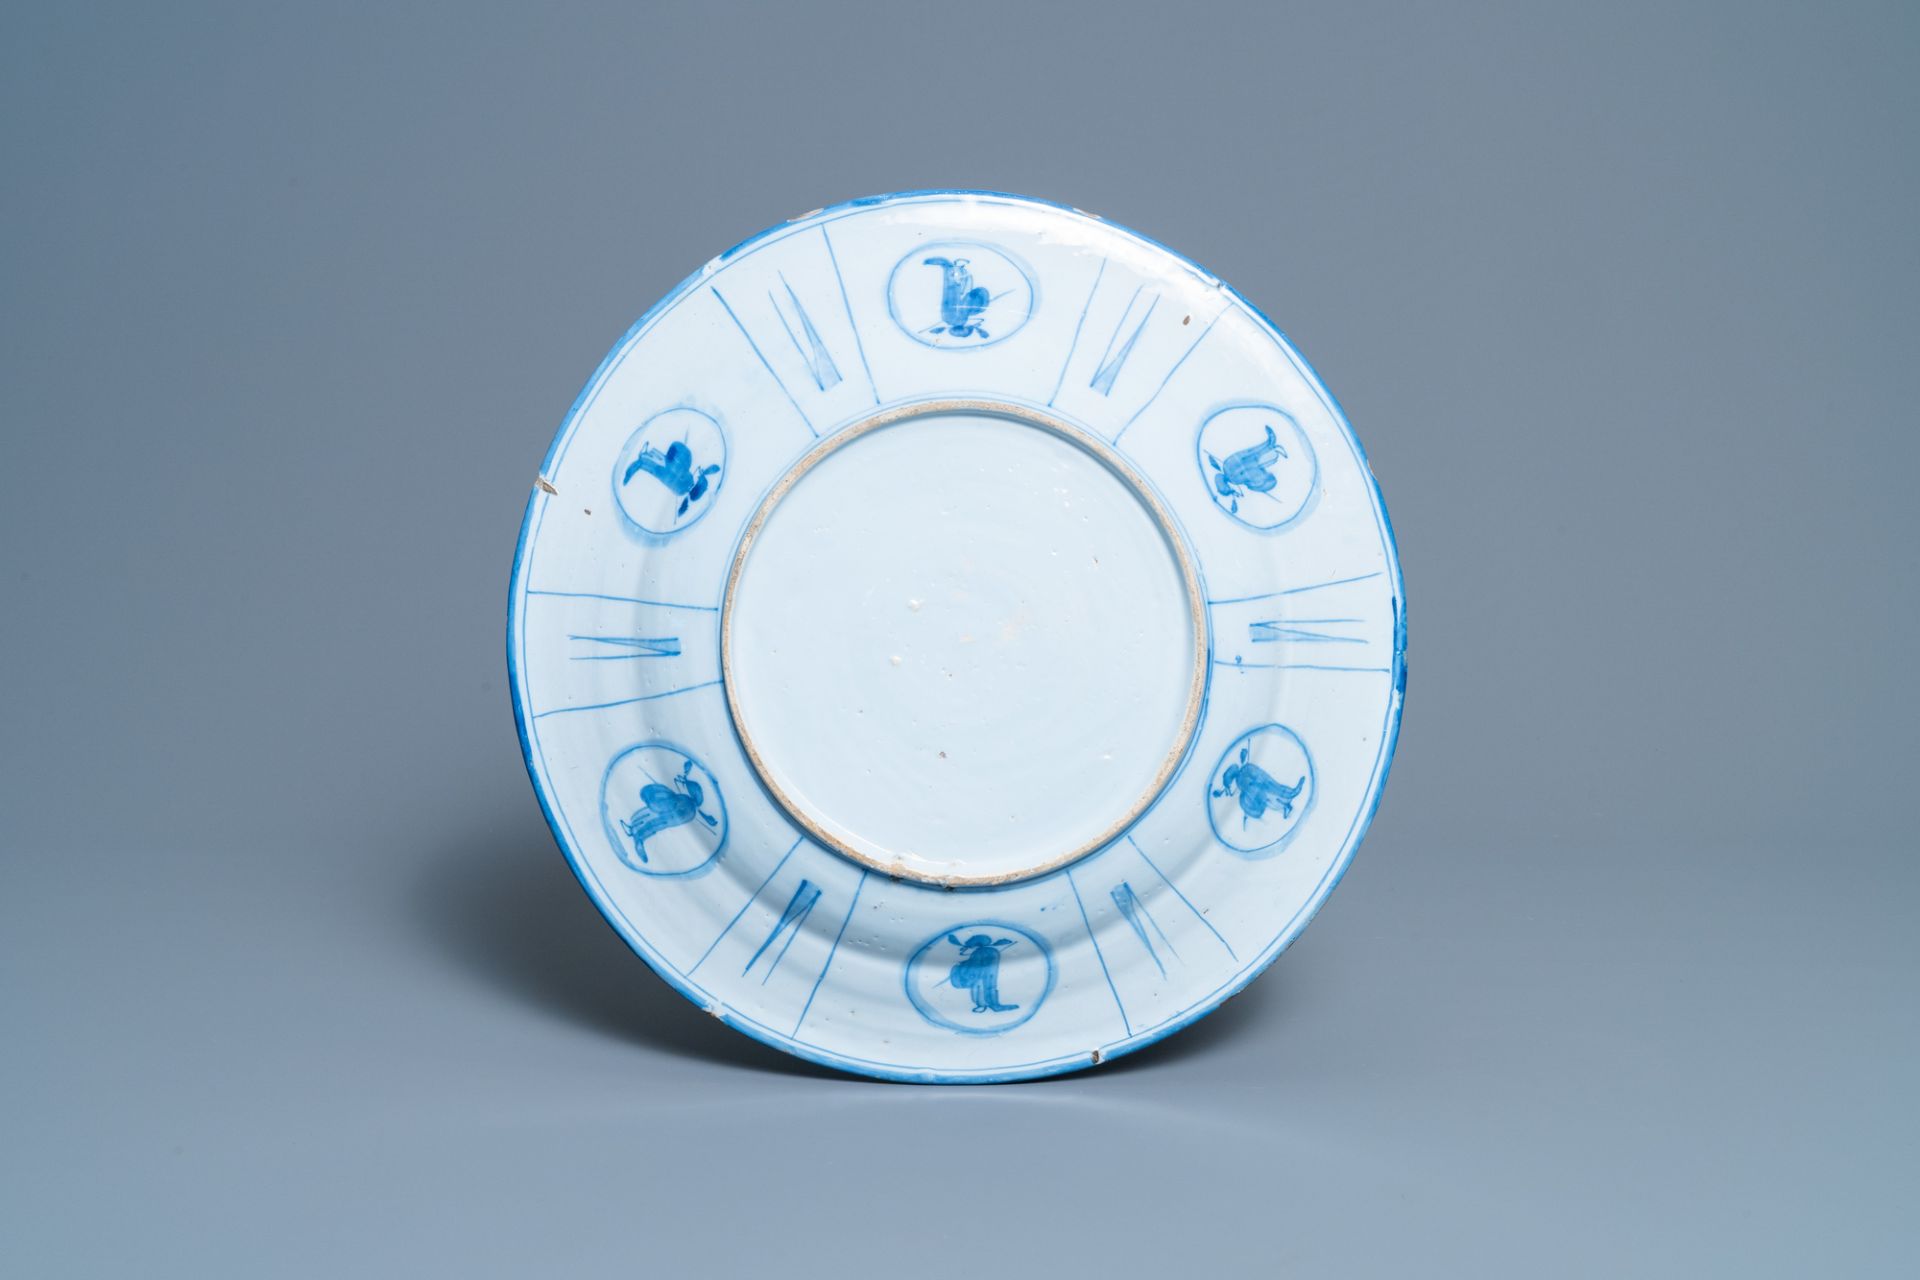 A Dutch Delft blue and white chinoiserie dish with figurative medallions on the back, late 17th C. - Image 2 of 2